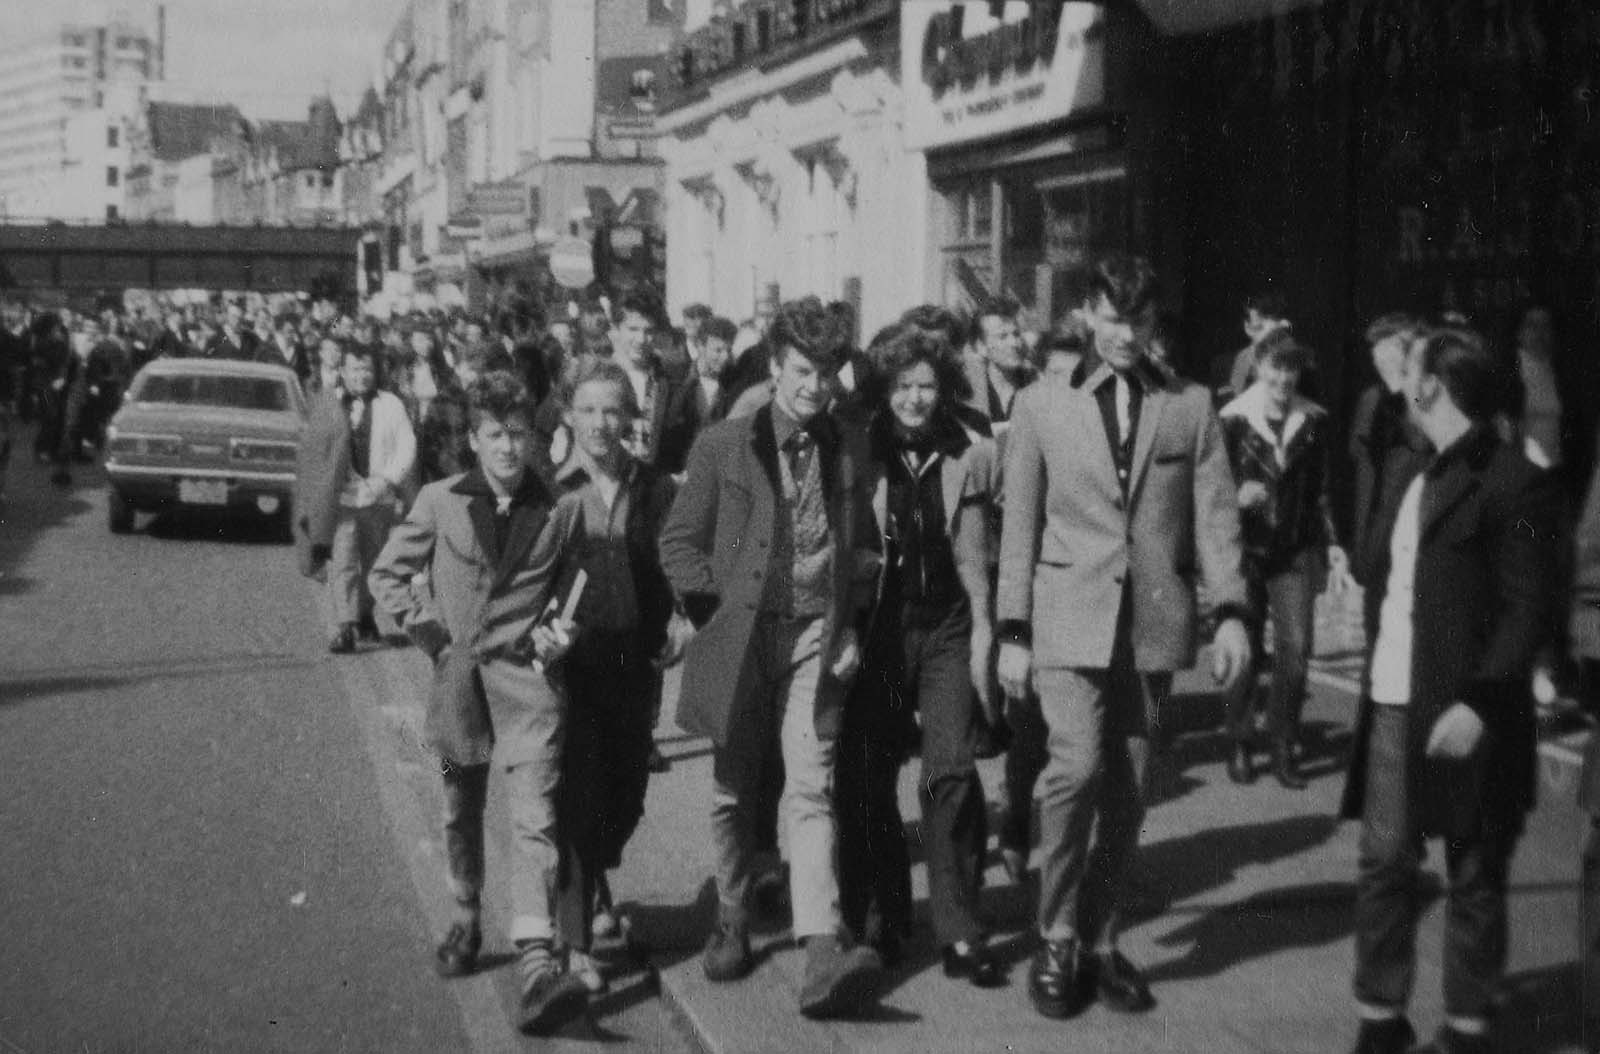 The Teds: Vintage Photos of Dapper Teddy Boys and Girls From the 1950s